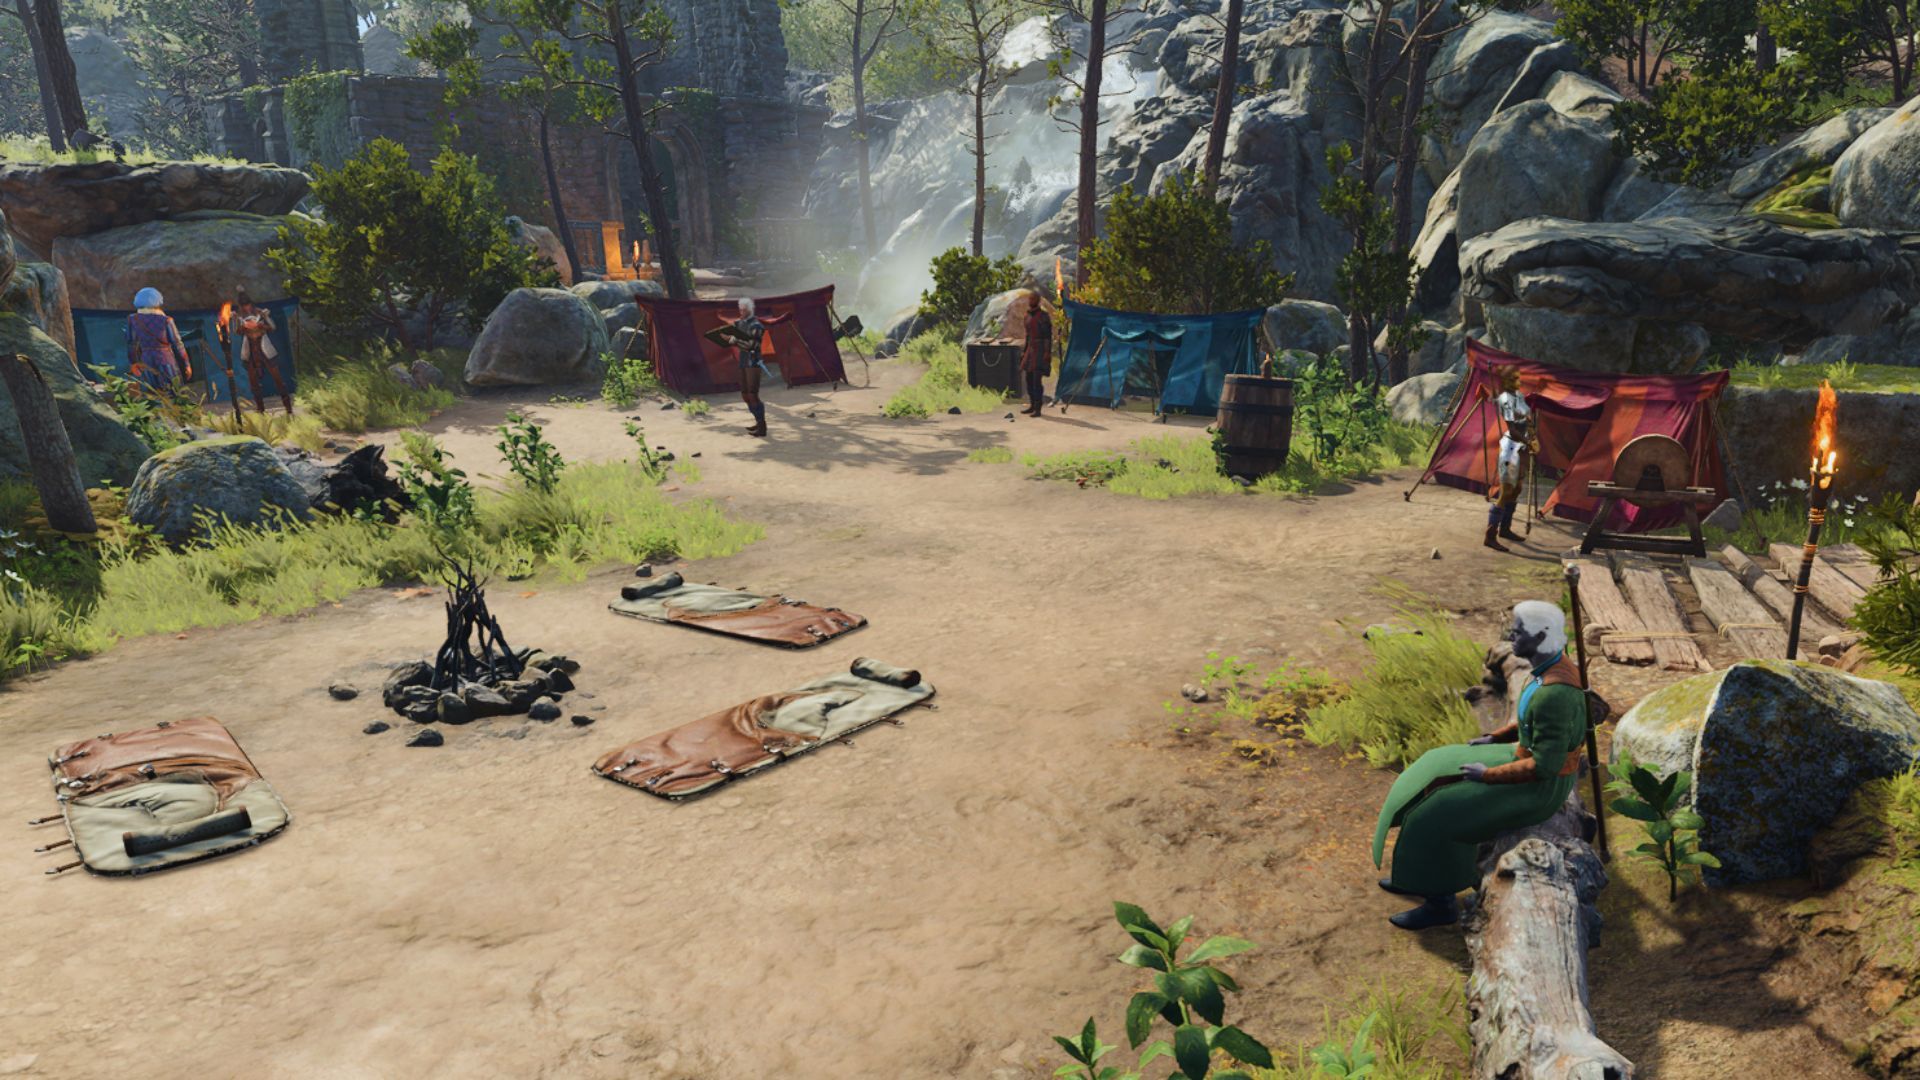 Baldur's Gate 3 - View of the player's camp in the forest